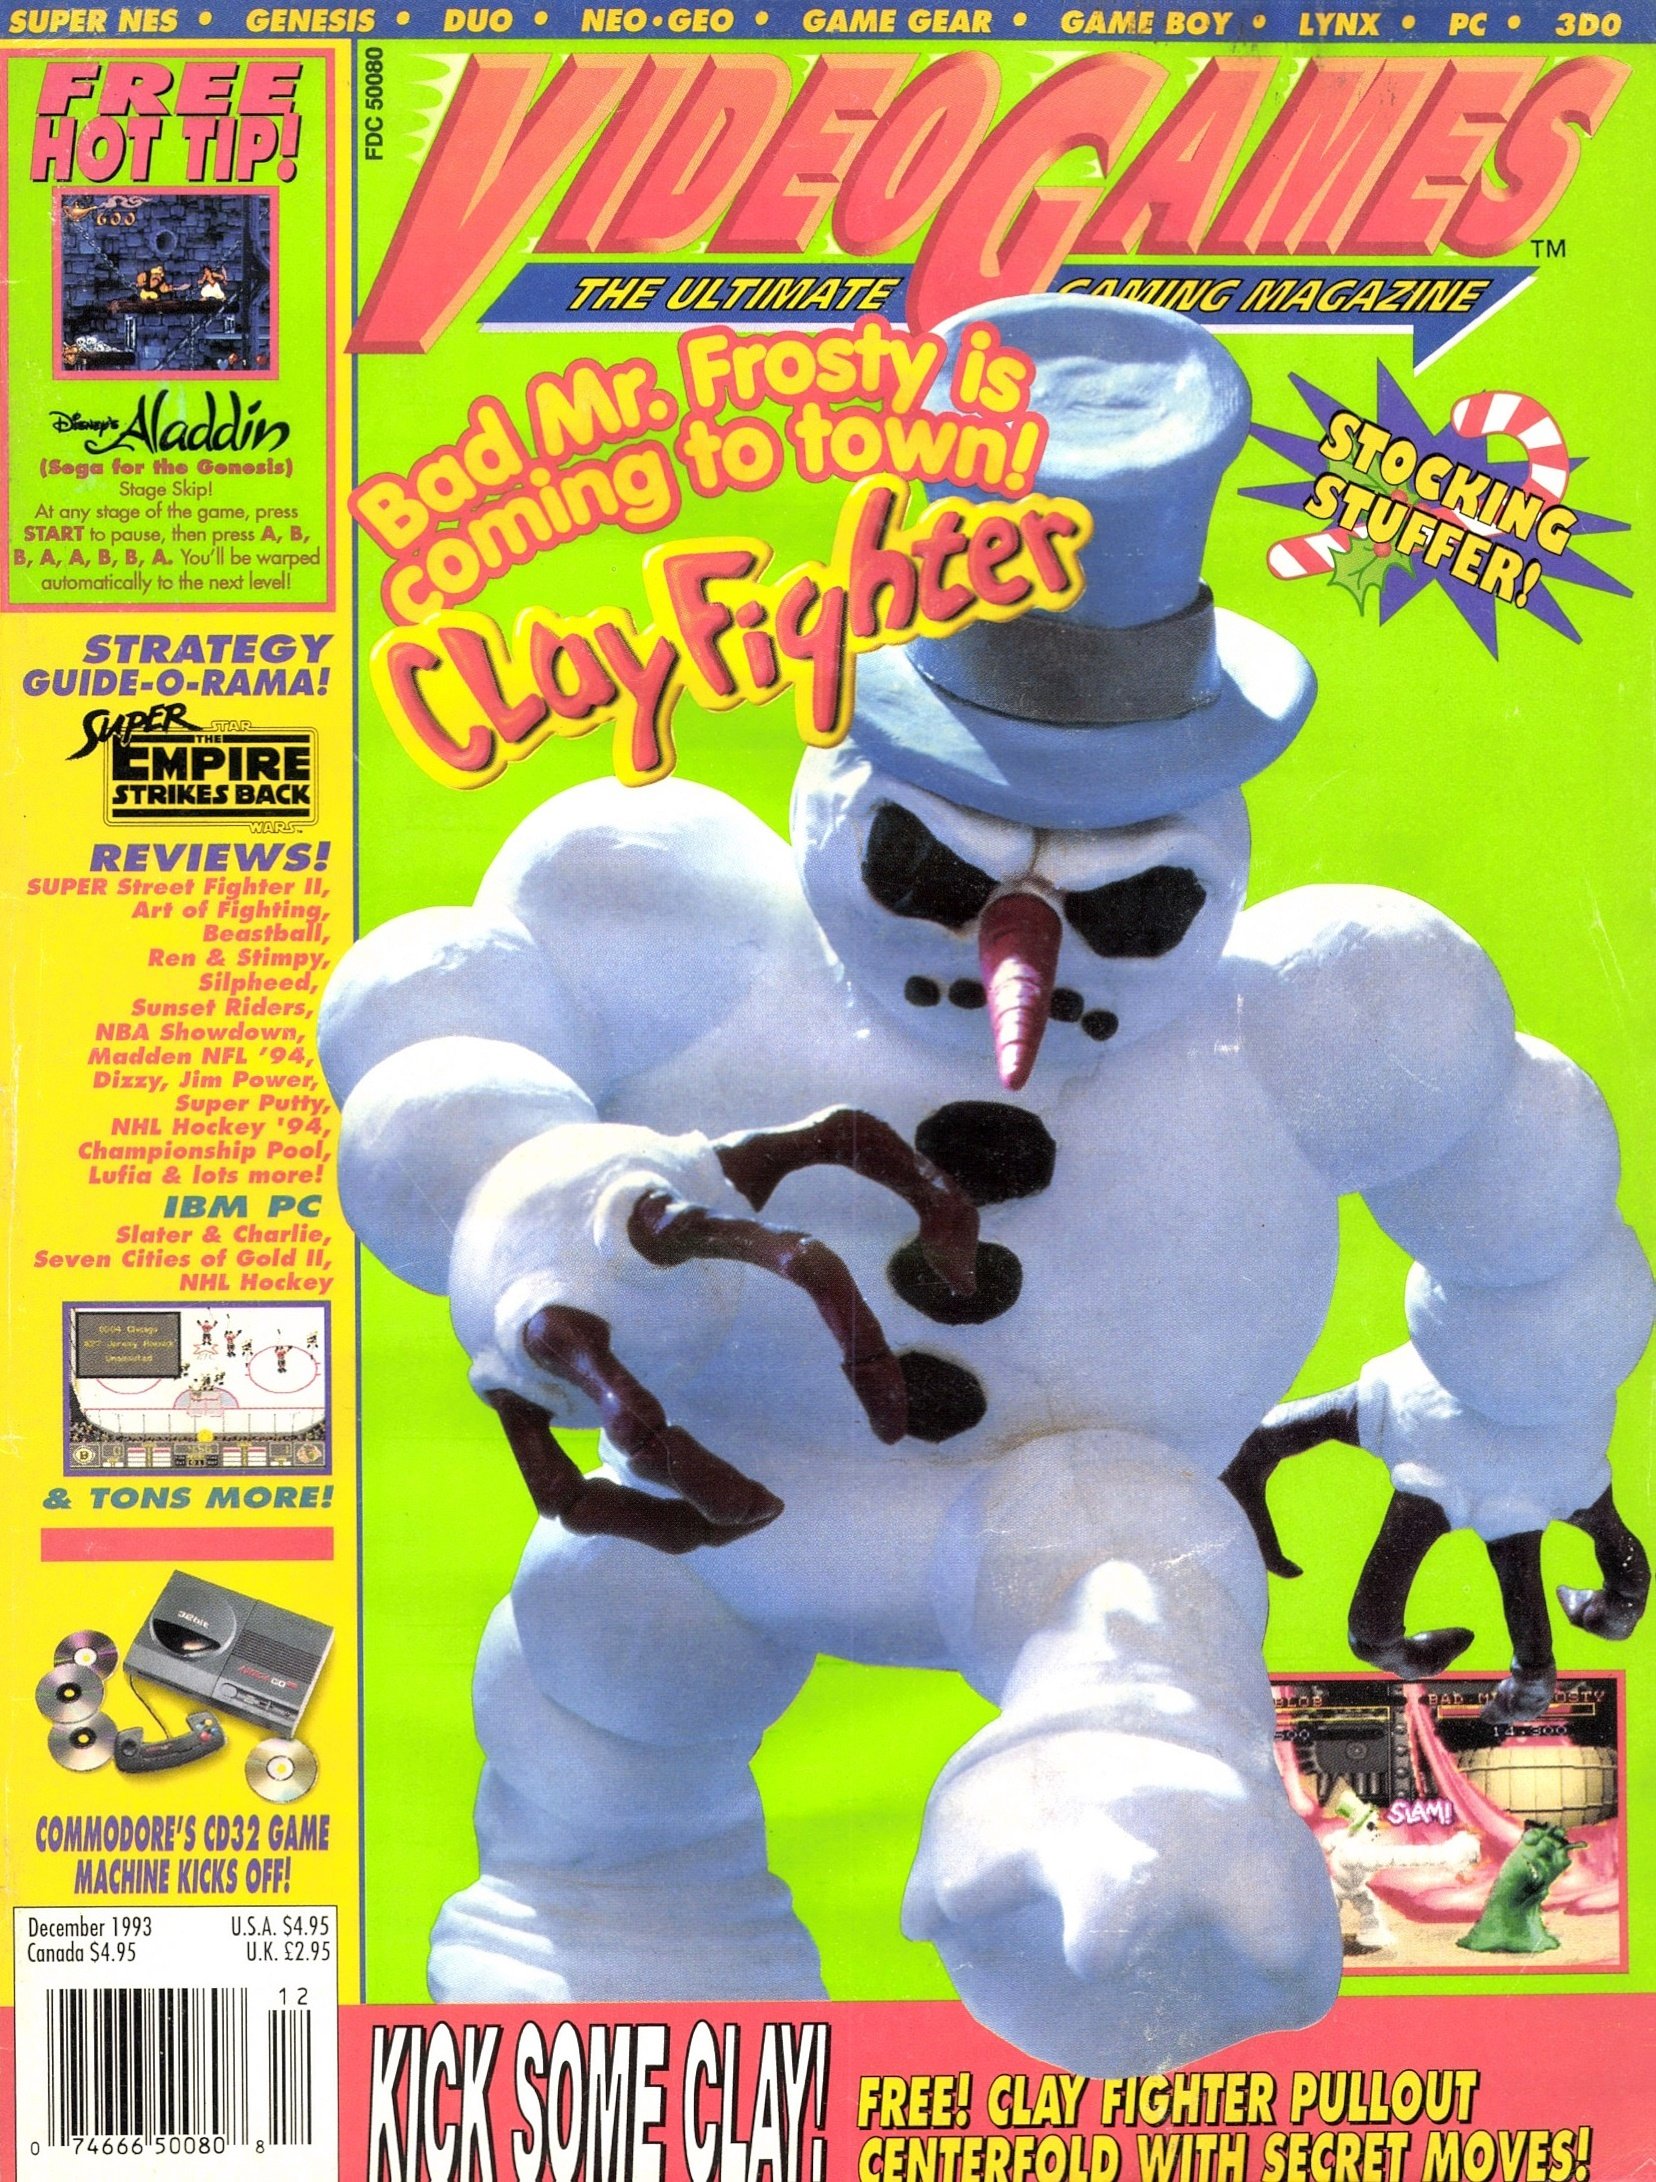 More information about "VideoGames The Ultimate Gaming Magazine Issue 059 (December 1993)"